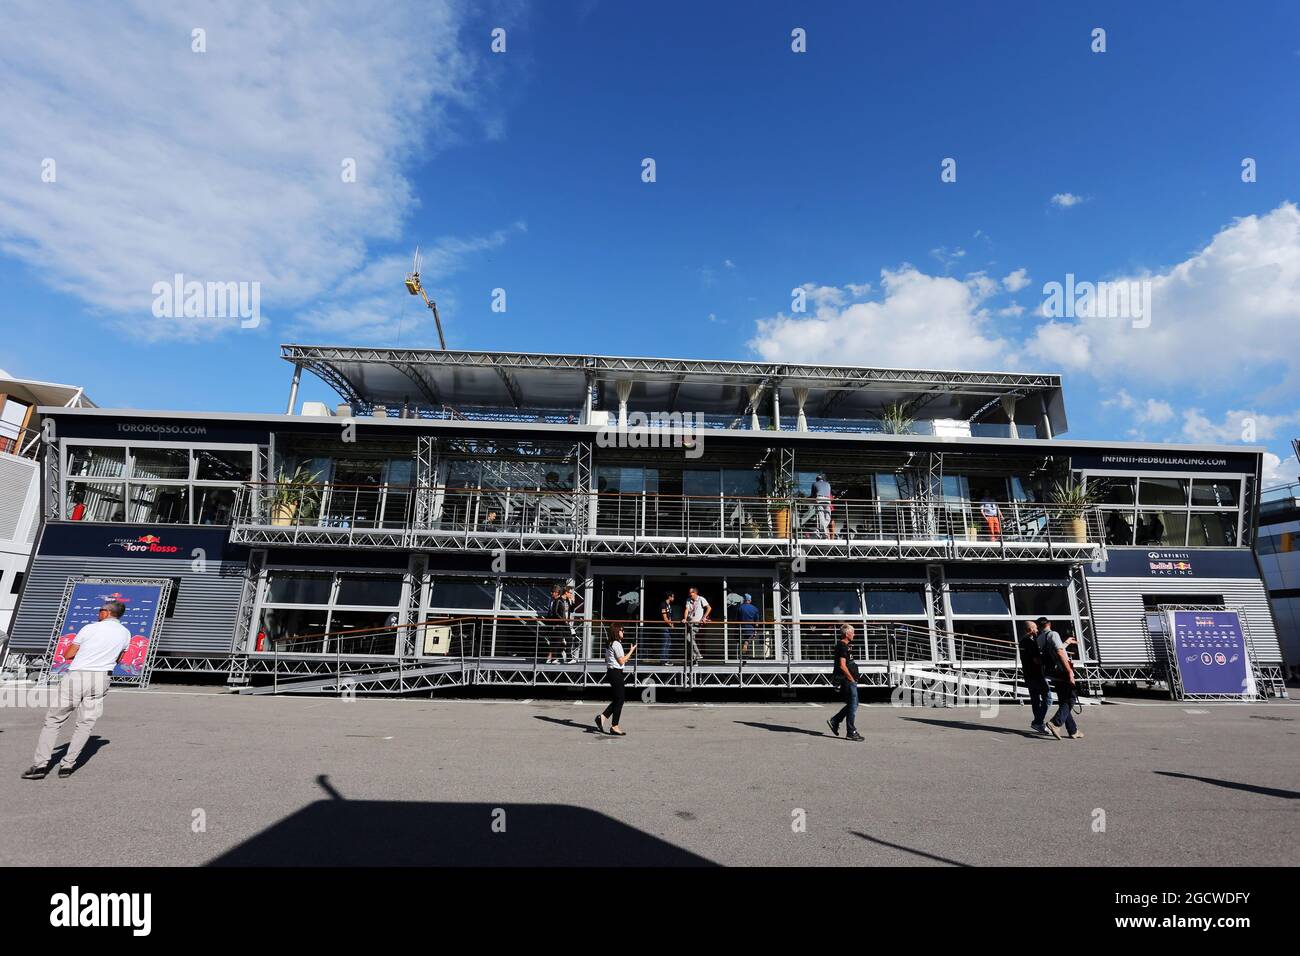 Red Bull Energy Station in the paddock. Italian Grand Prix, Saturday 5th September 2015. Monza Italy. Stock Photo